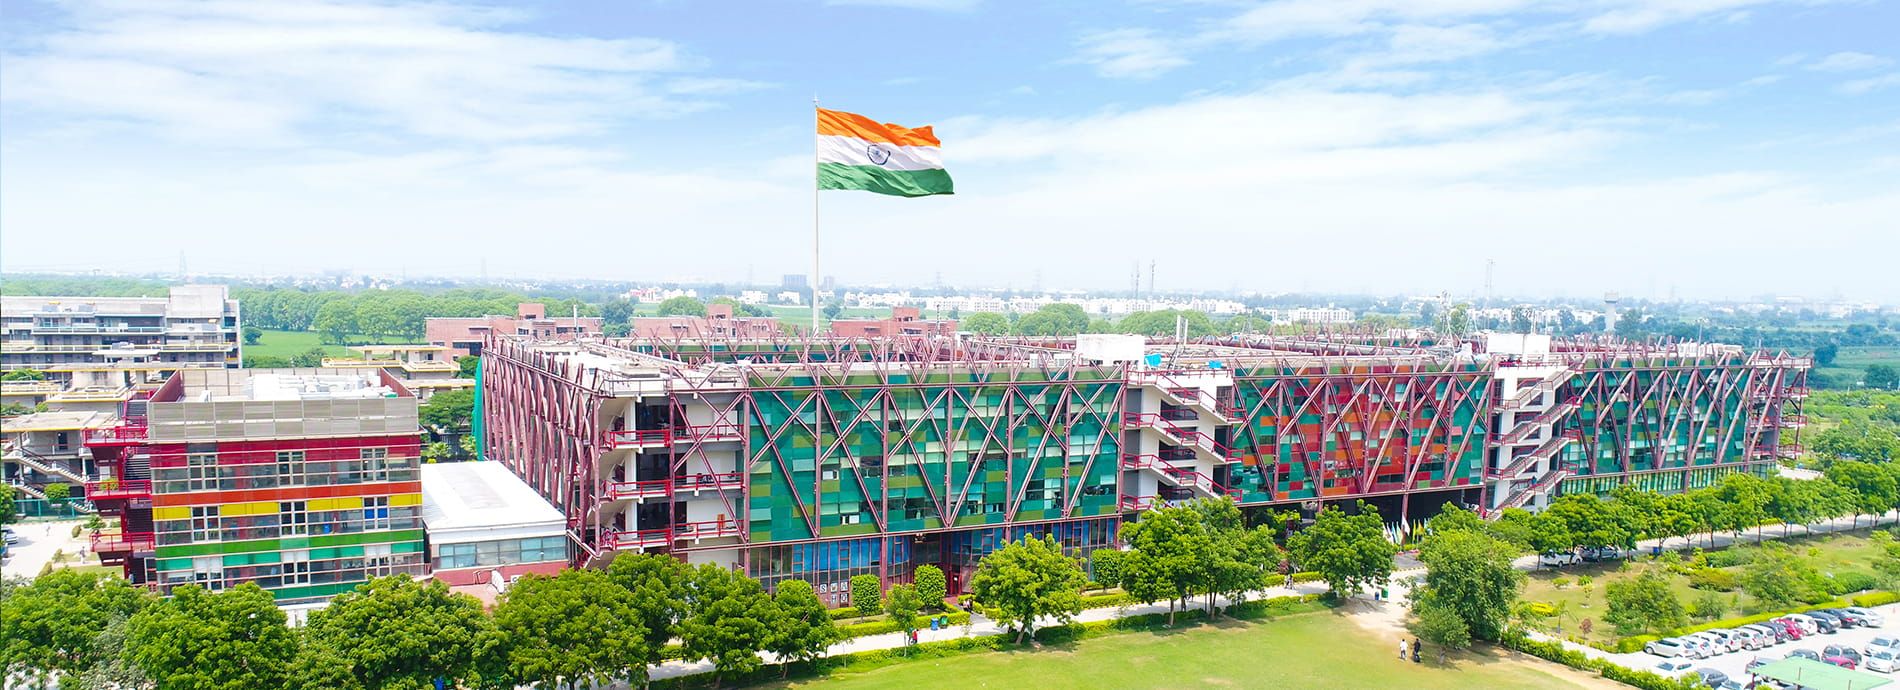 Jindal School of Banking and Finance, Sonipat